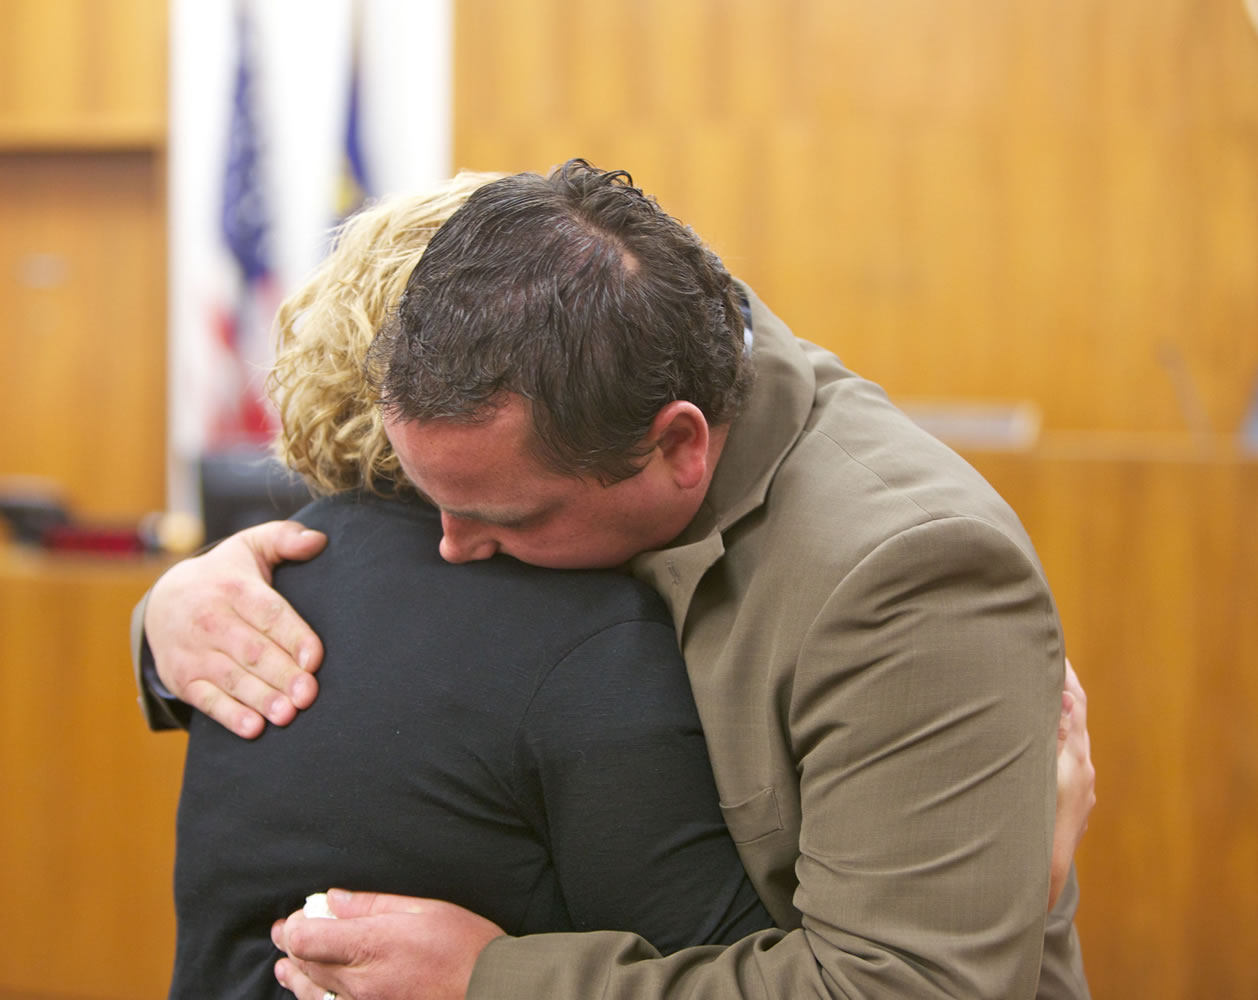 Dale Hickman and his wife, Shannon, embrace after Dale's testimony in Clackamas County Circuit Court in Oregon City, Ore.